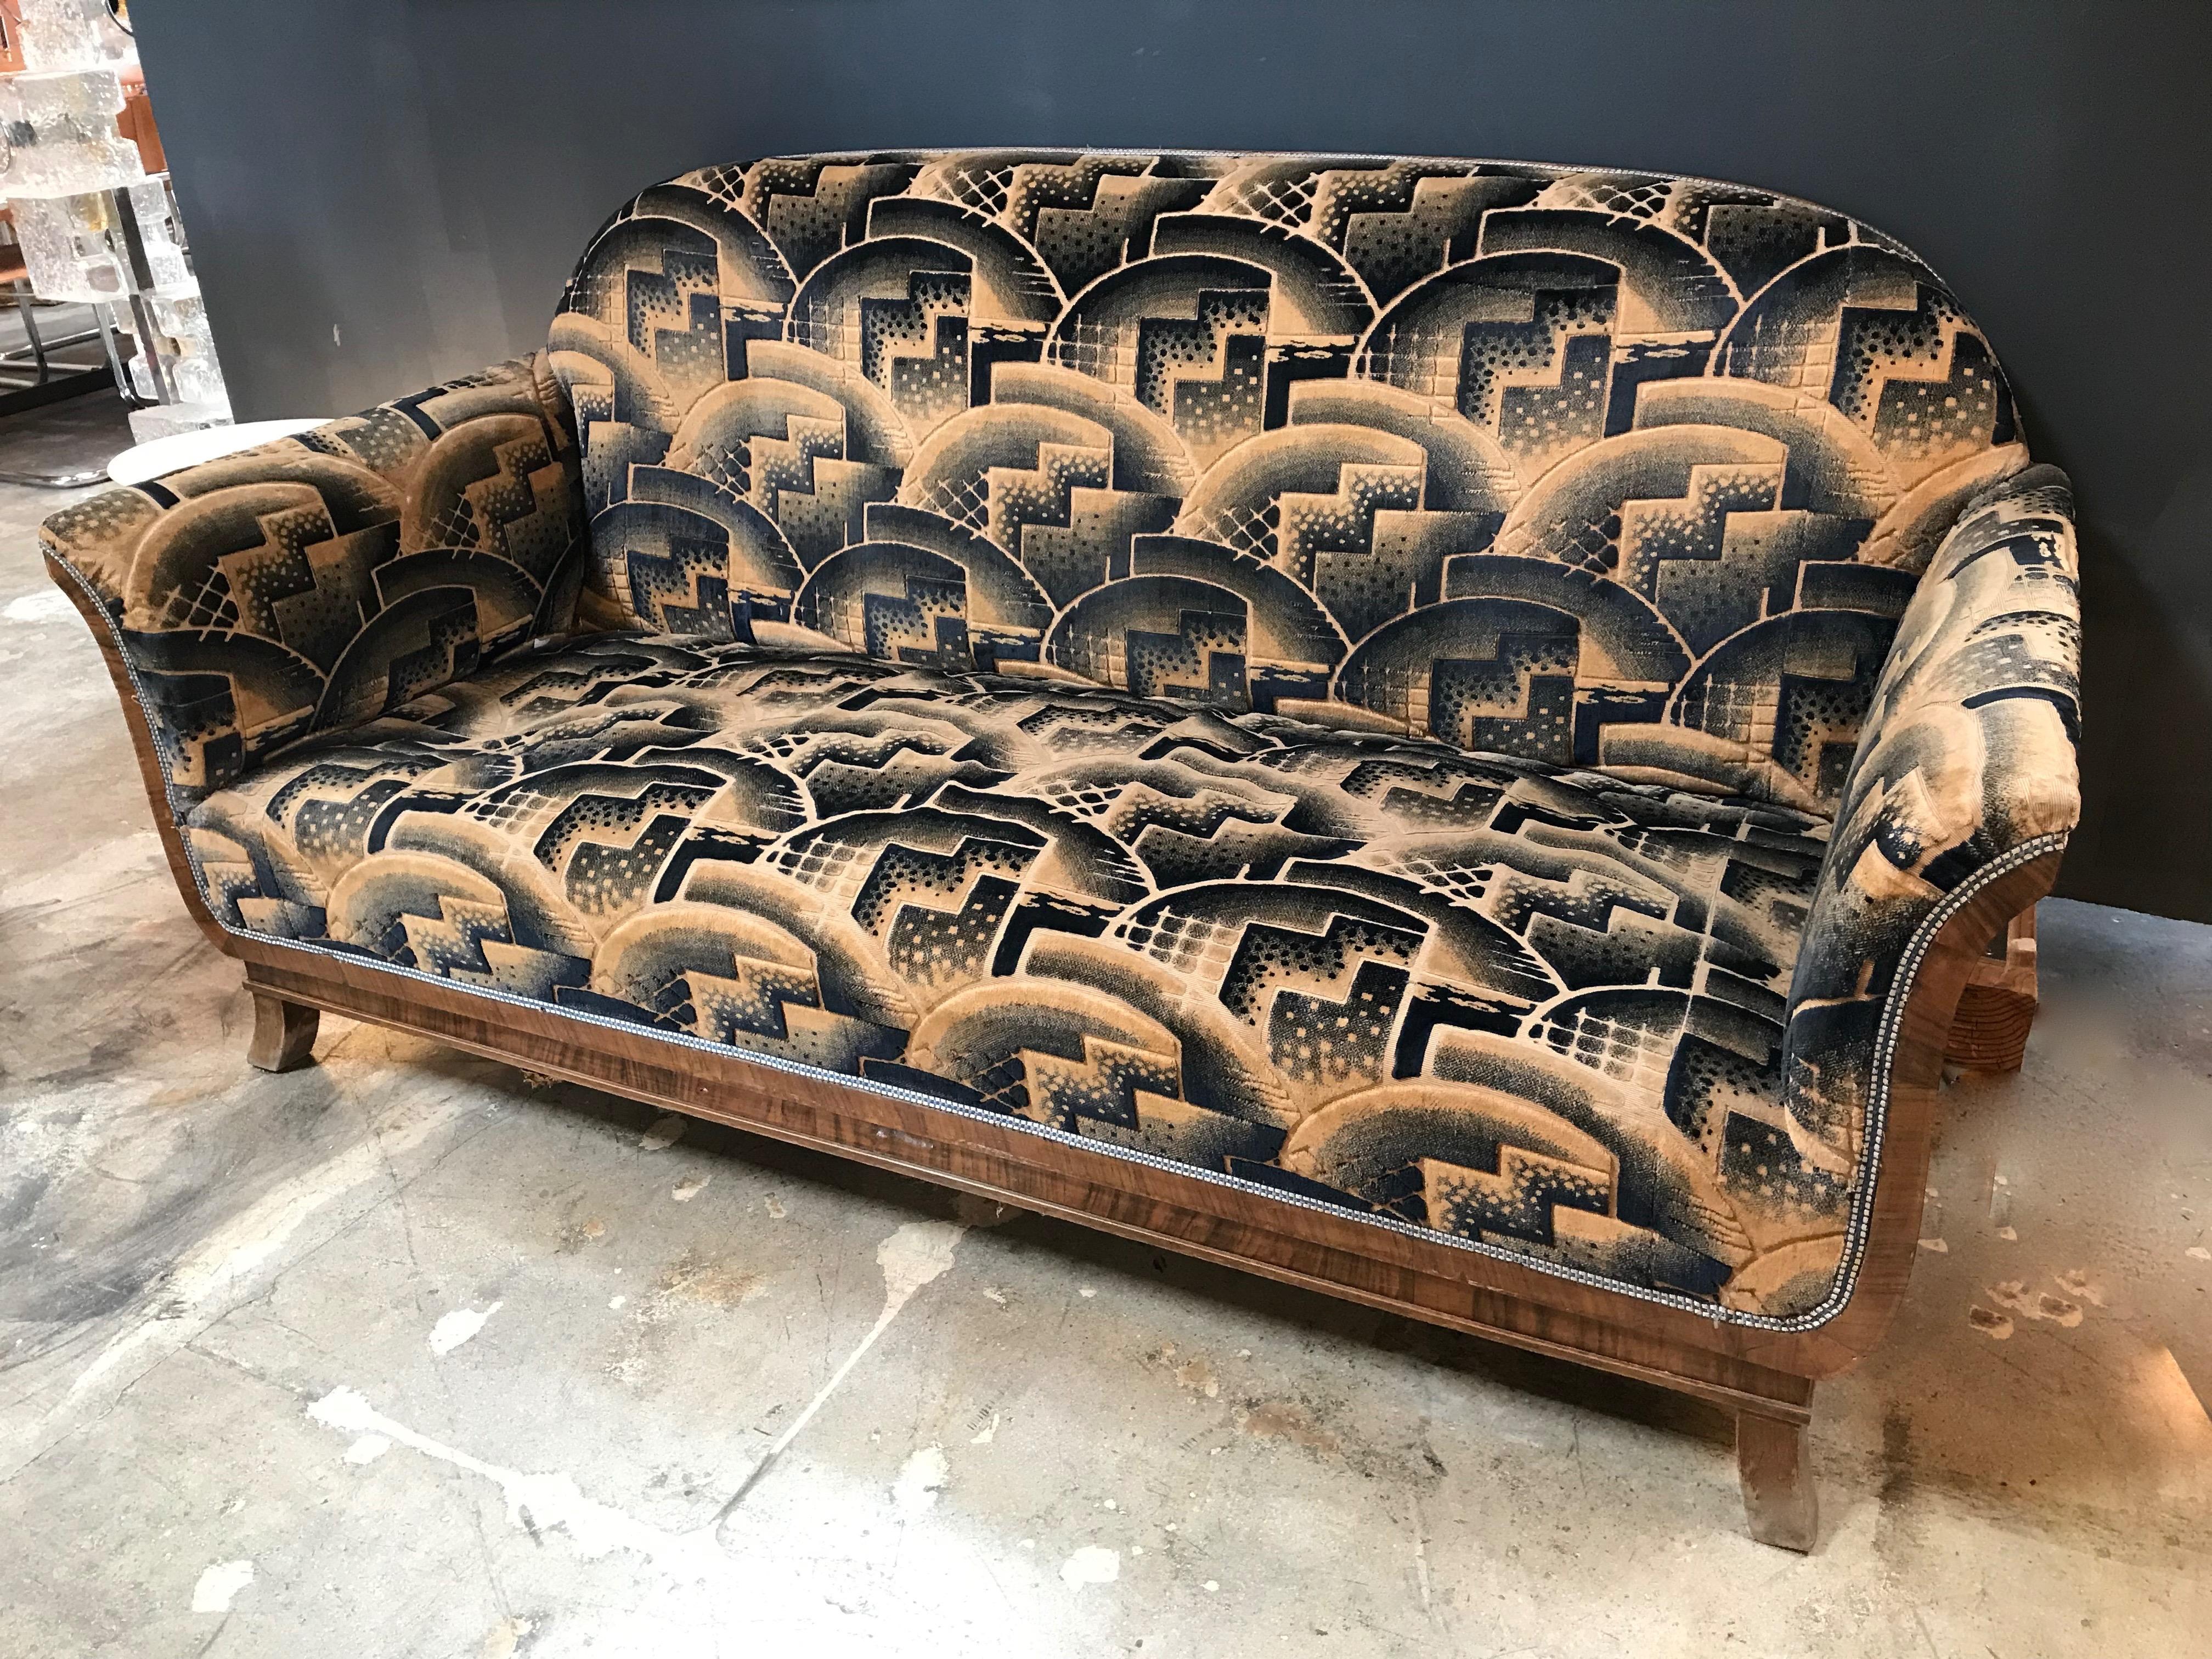 AVAILABLE ONLY TWO CHAIRS NO SOFA
Glamorous Art Deco sofa and two chairs suite in cotton velvet, Italy 1920s
Original, unique , rare fabric in astonishing very good condition.
The two chairs of the set are sell separated . 
Their measures and